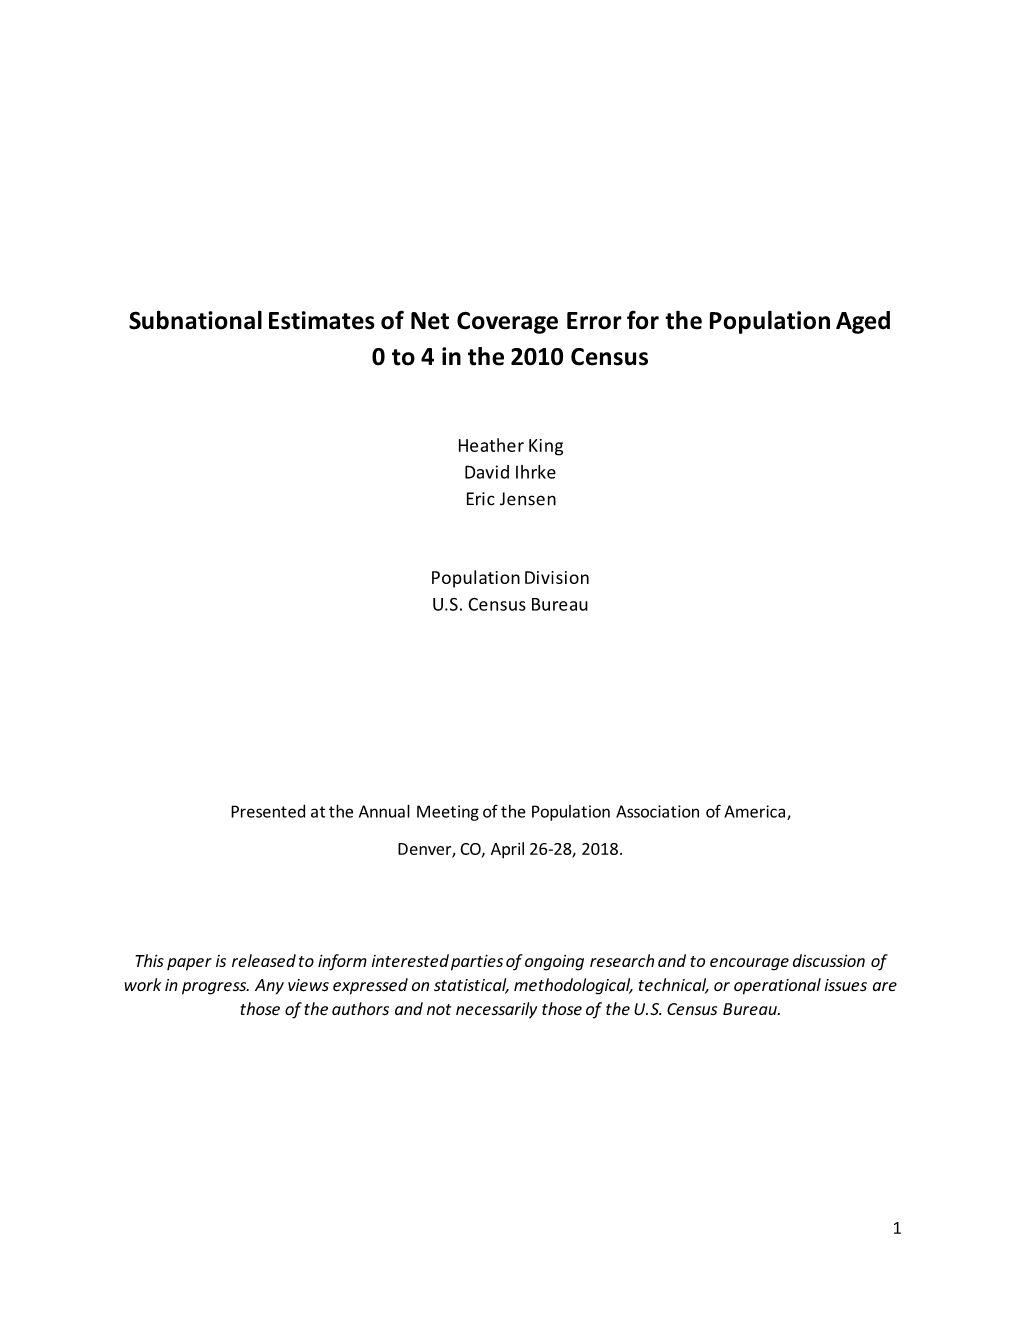 Subnational Estimates of Net Coverage Error for the Population Aged 0 to 4 in the 2010 Census